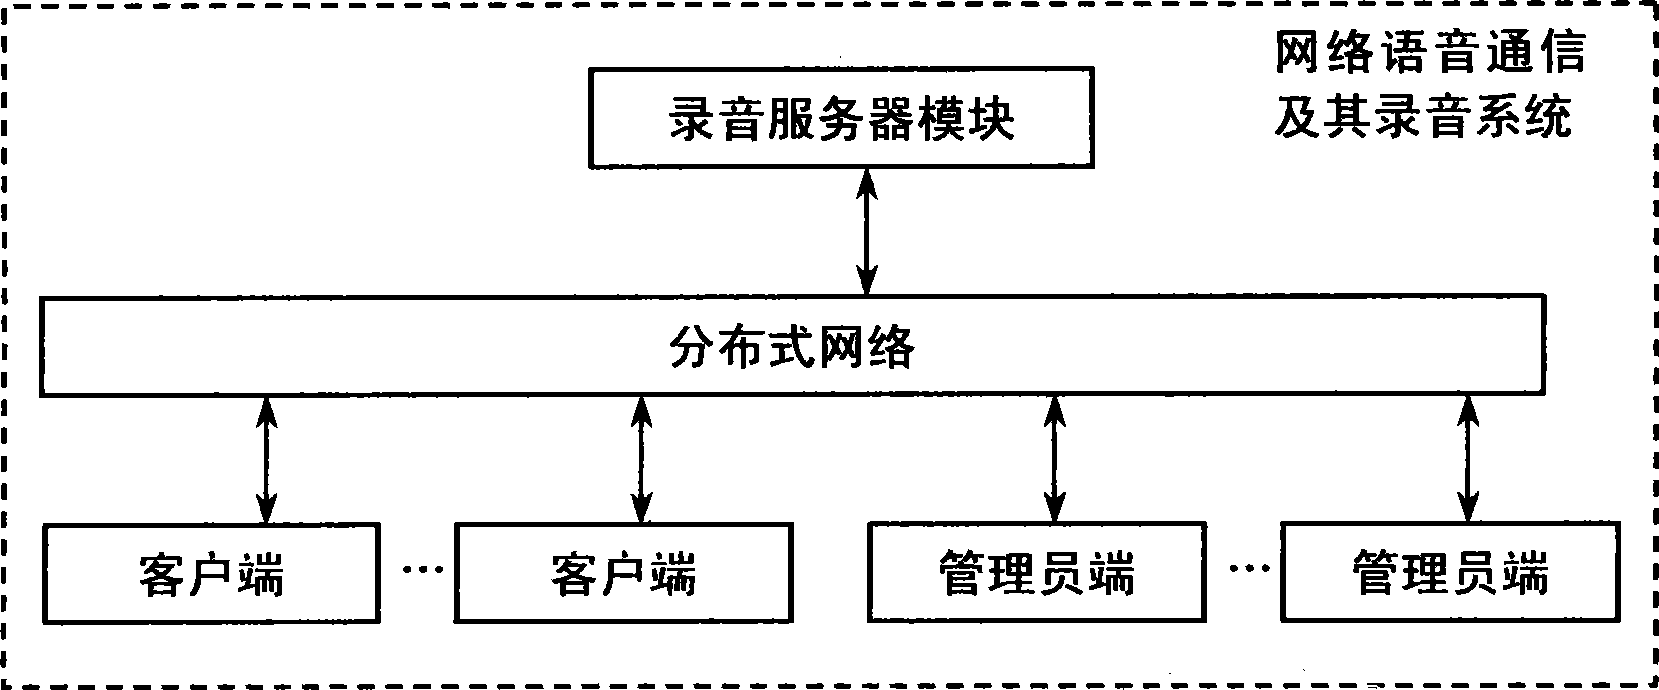 Real-time recording supervising service method based on network voice communication